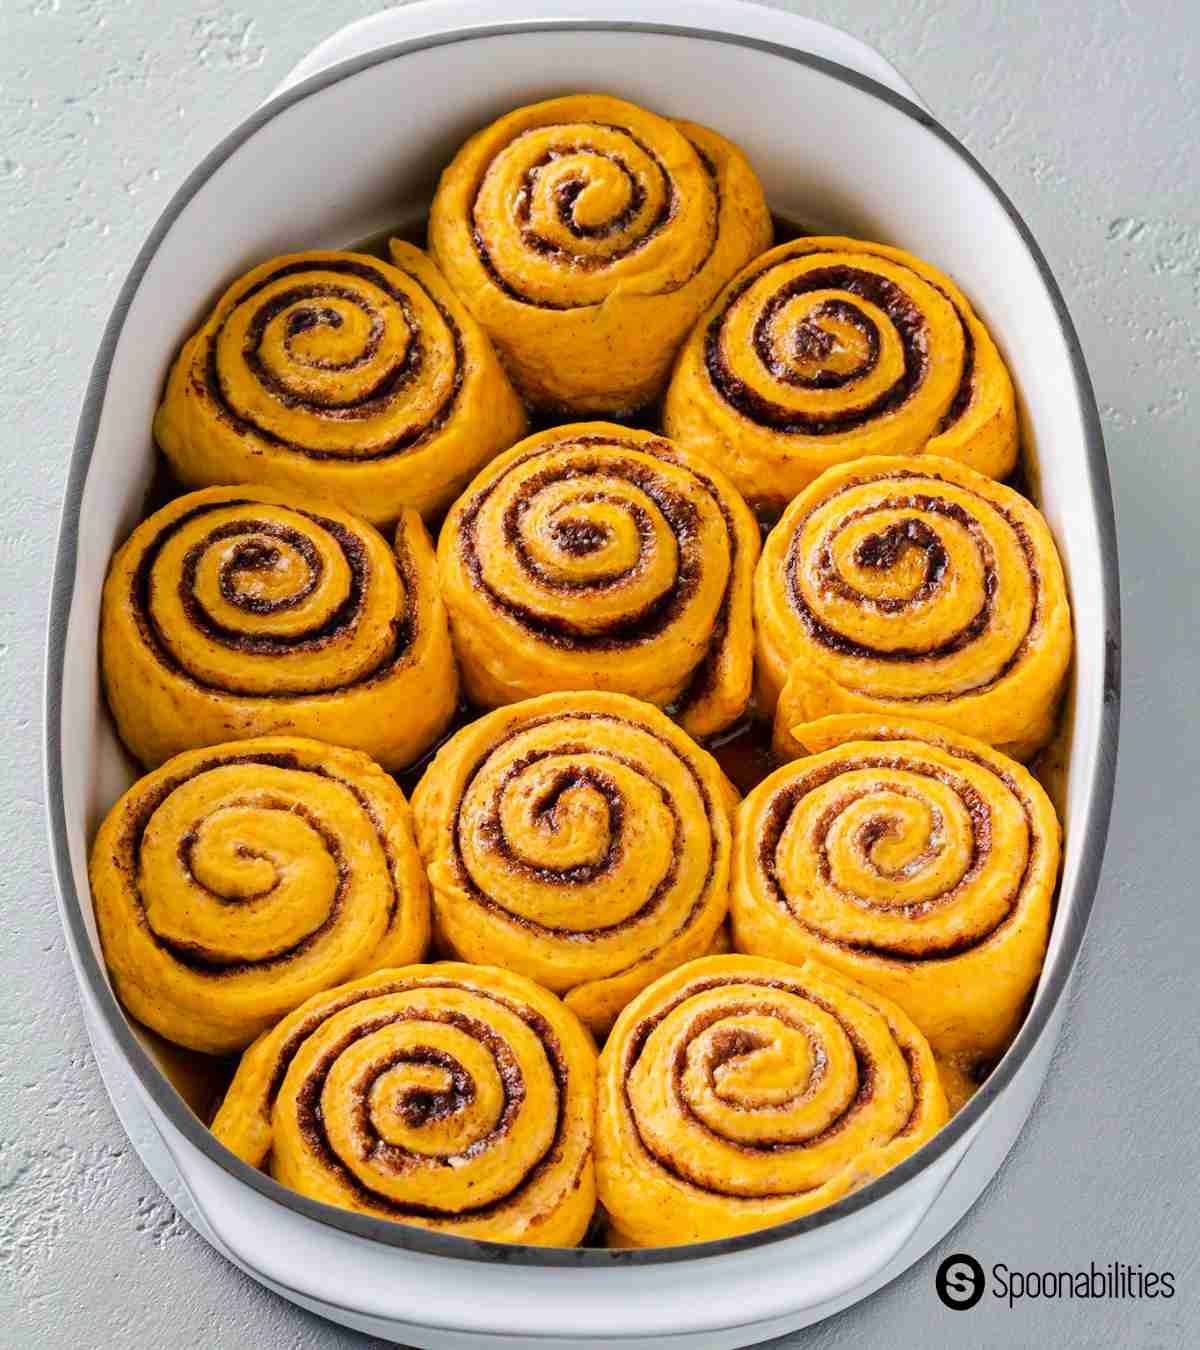 baked cinnamon rolls without cream cheese icing on top